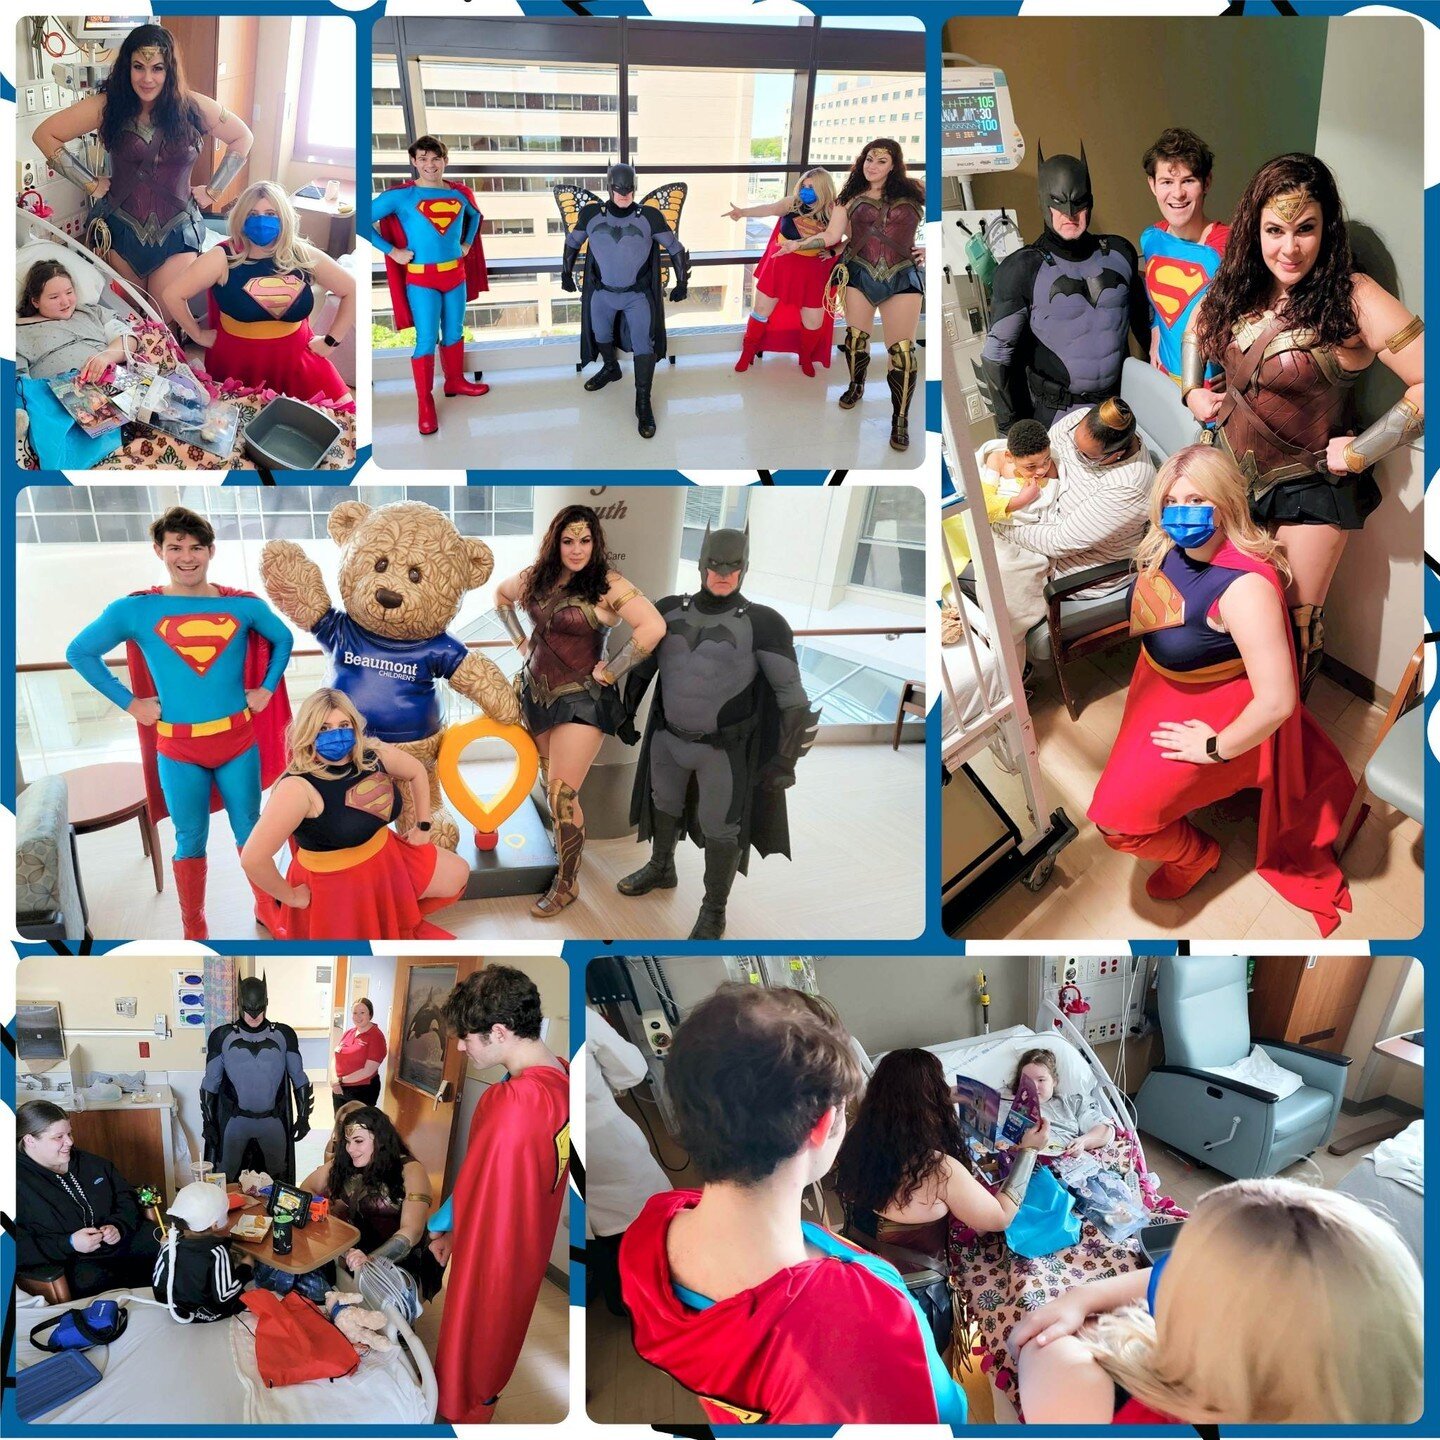 #throwbackthursday to our May visit to Beaumont Children's Hospital! The friends and family of Alex and Rachel Trautman sponsored this visit. Being able to pass out care packages and spread smiles at Beaumont always warms our hearts. We're already lo